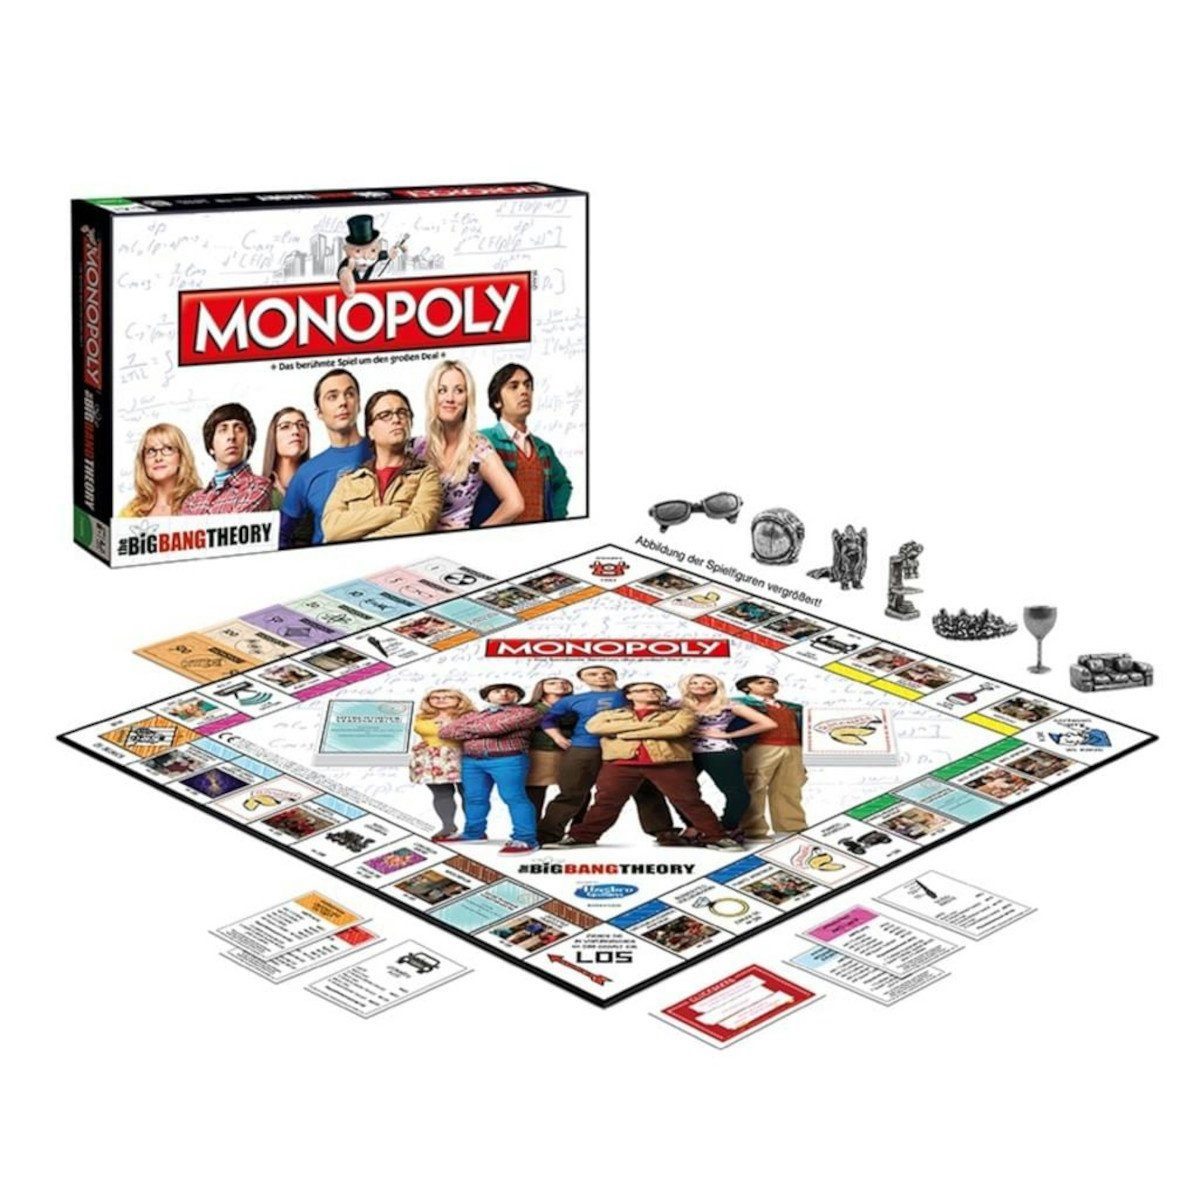 Moves Monopoly Winning The Spiel, Big Brettspiel Theory Bang